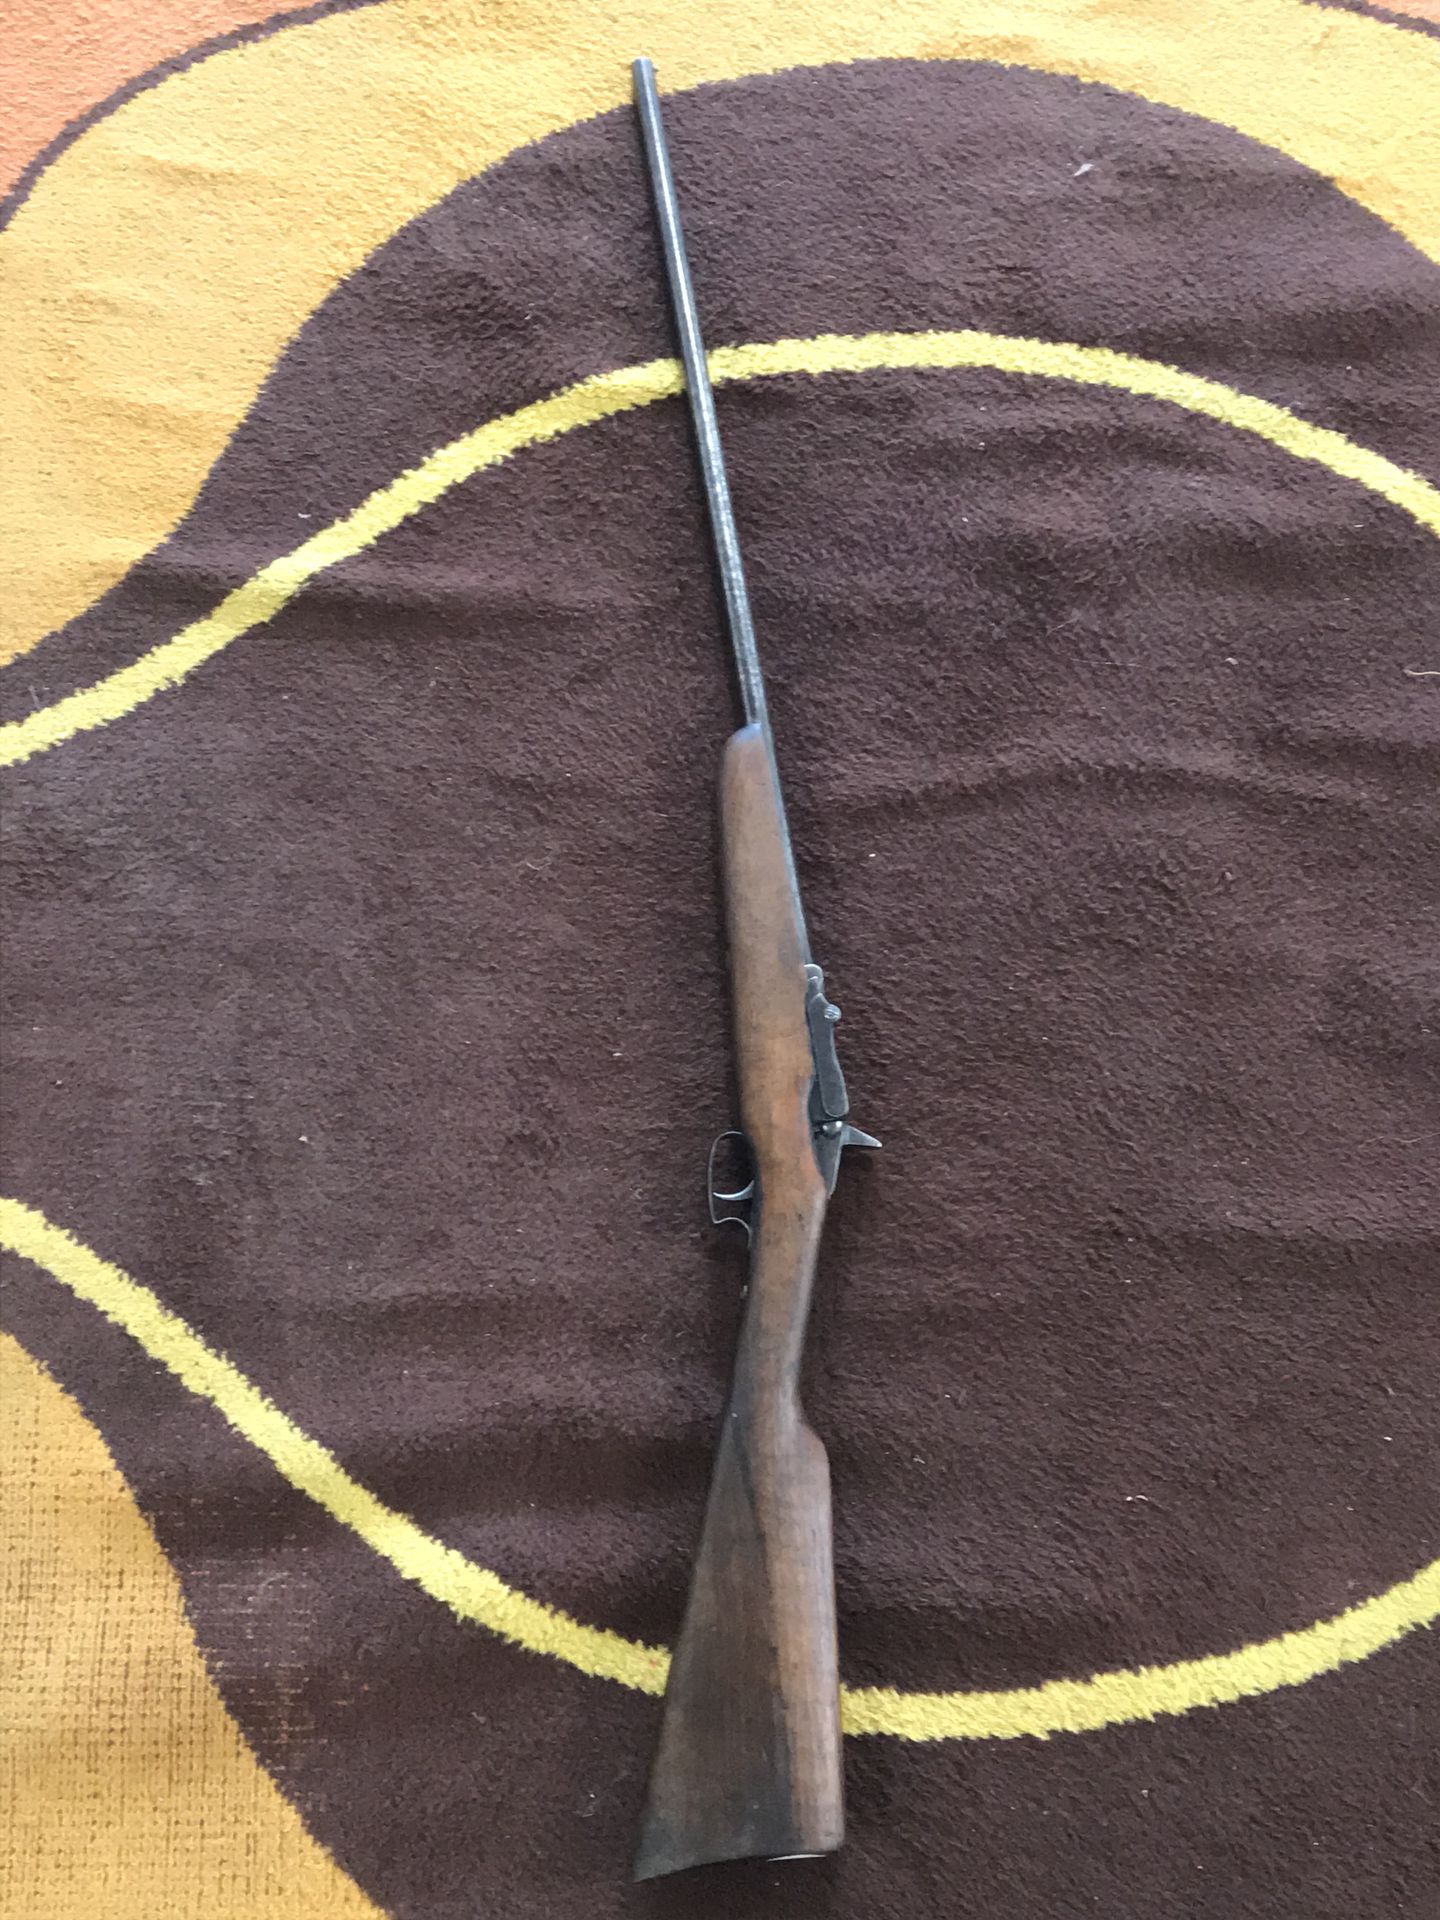 Null WARNANT TYPE RIFLE 

Calibre 9mm

Good condition, functional

L. 103 cm